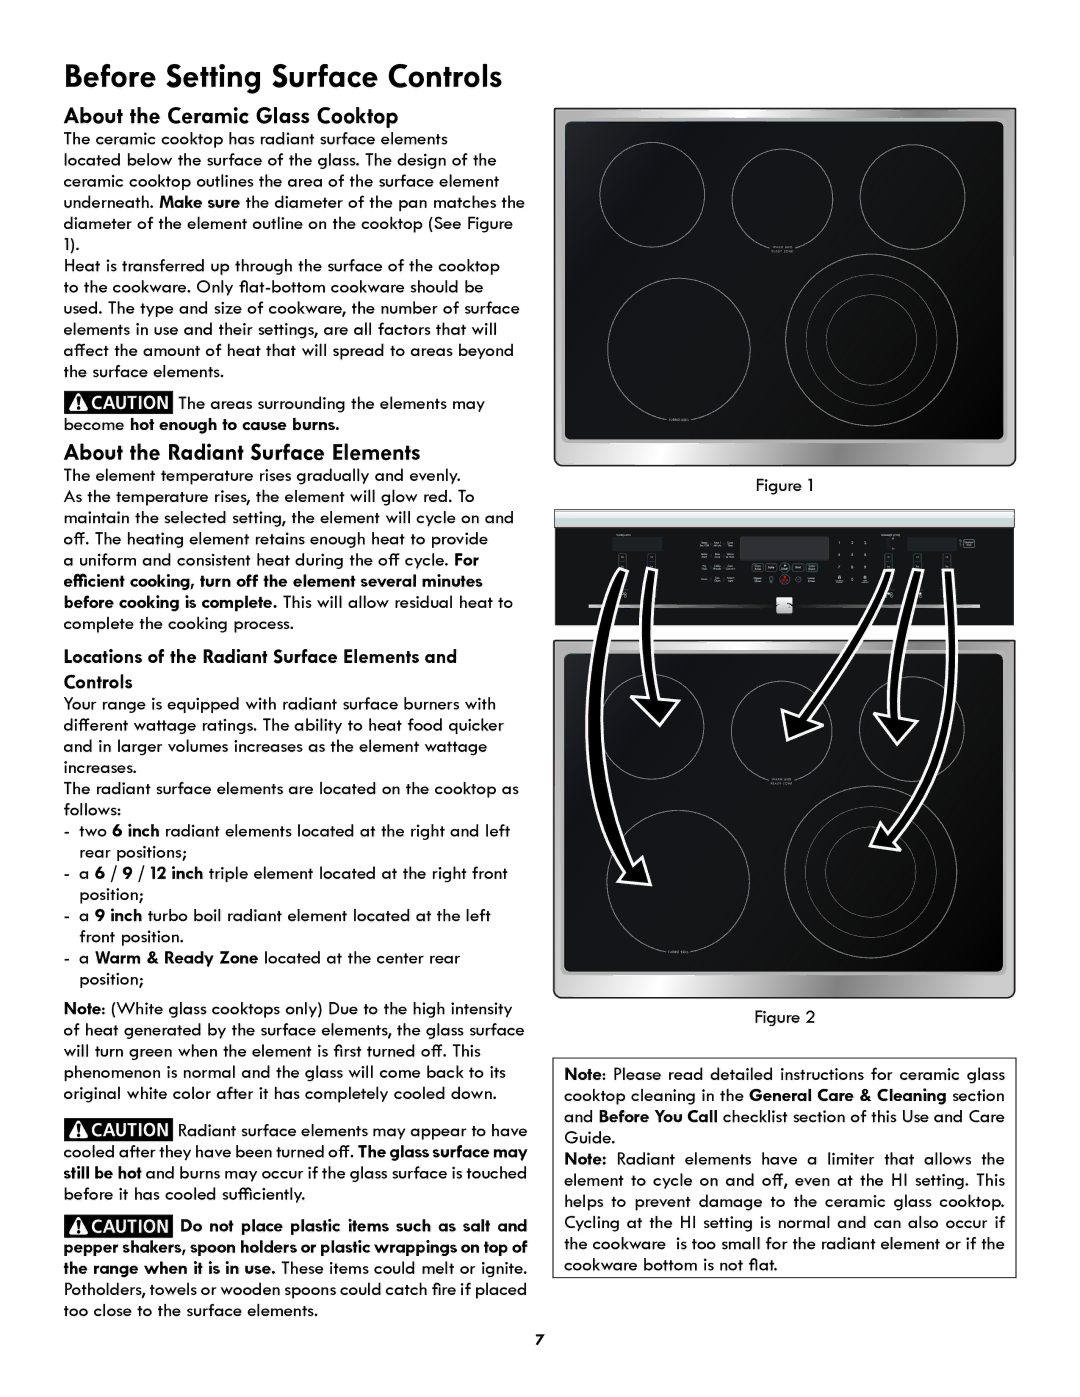 Kenmore 790.9751 manual About the Ceramic Glass Cooktop, About the Radiant Surface Elements 